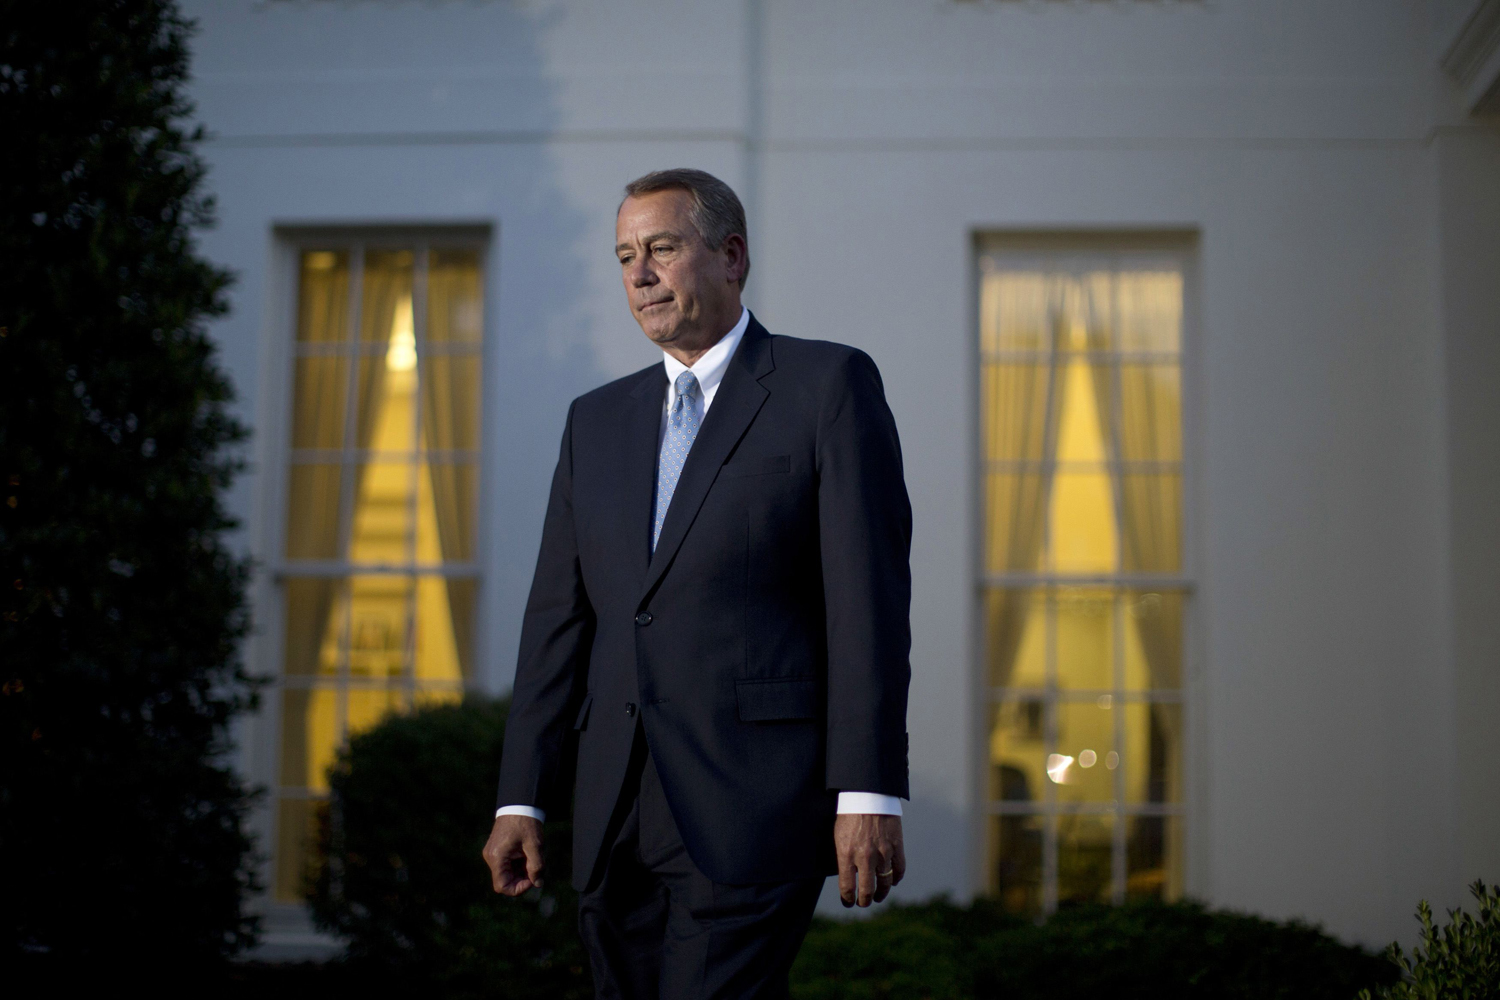 U.S. House Speaker Boehner walks from a meeting with U.S. President Obama, outside the West Wing of the White House in Washington